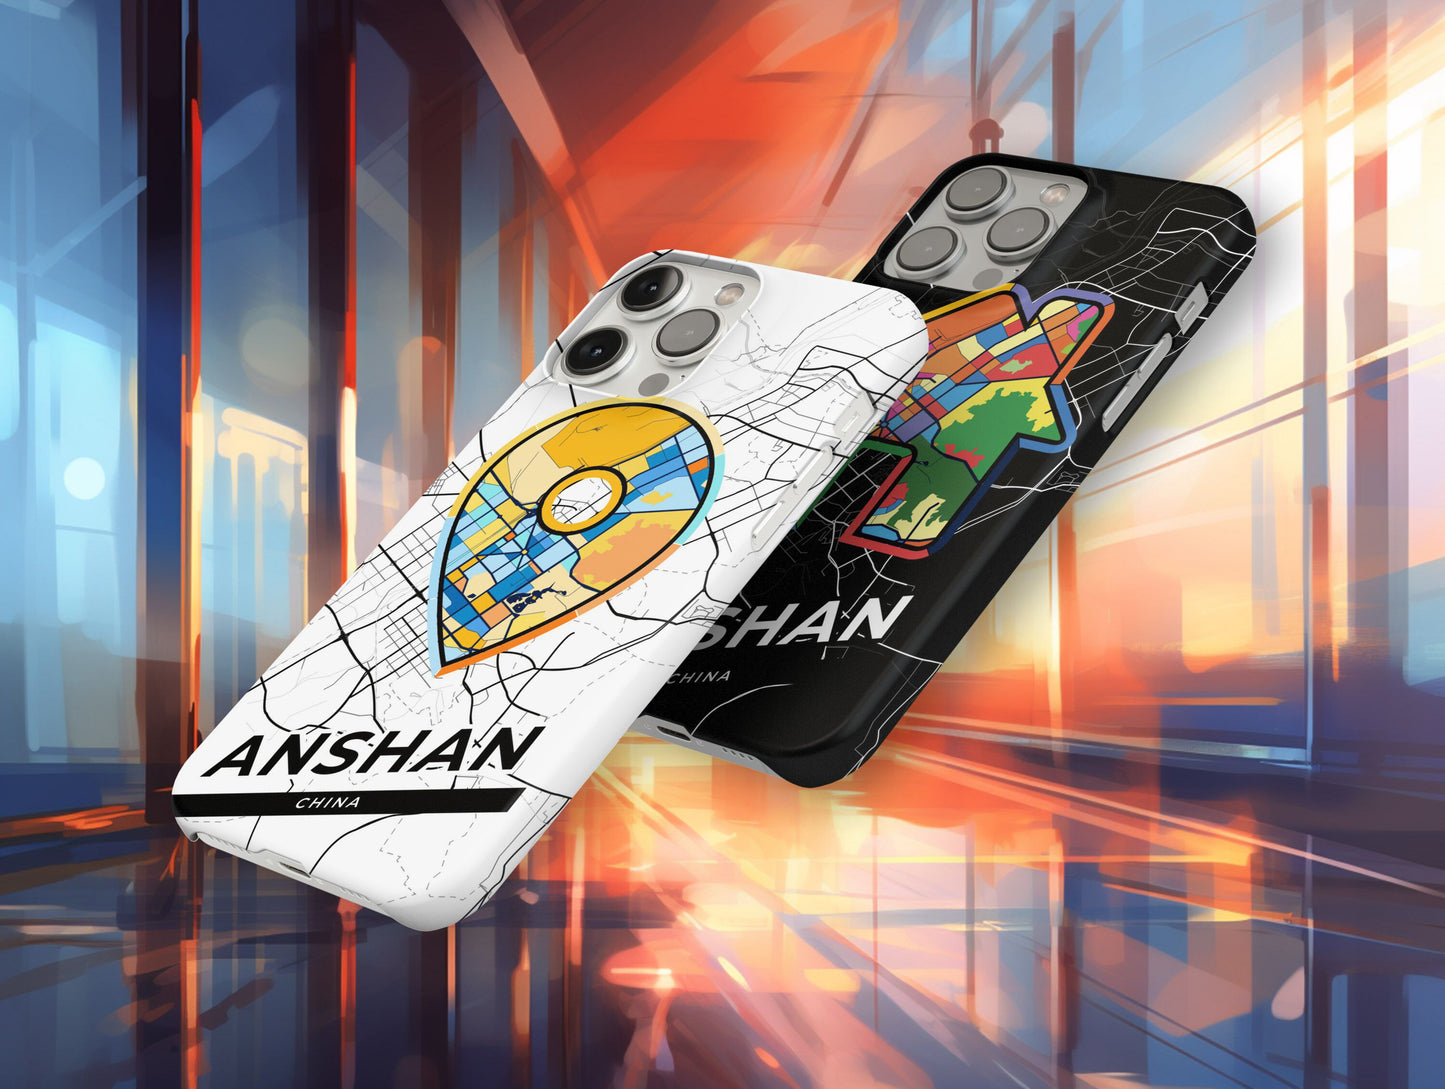 Anshan China slim phone case with colorful icon. Birthday, wedding or housewarming gift. Couple match cases.